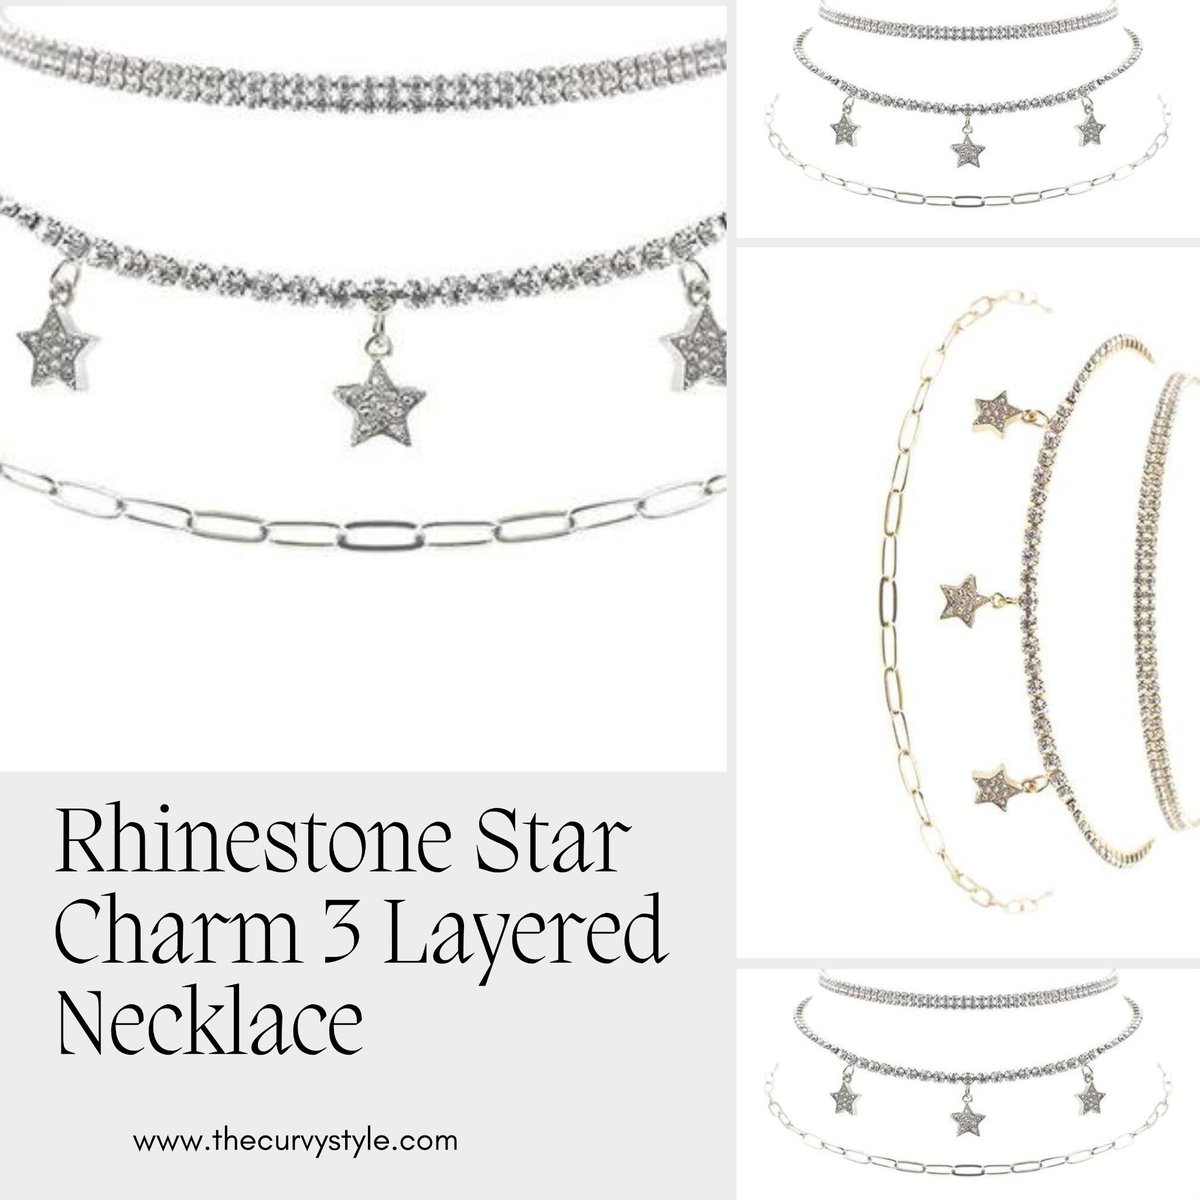 🌠 Add some celestial sparkle to your look with our enchanting Rhinestone Star Charm 3 Layered Necklace!⭐️✨ This dazzling piece is perfect for those who love all things cosmic and chic. thecurvystyle.com/products/fbj2-… . #CosmicChic #CelestialFashion #StarryStyle